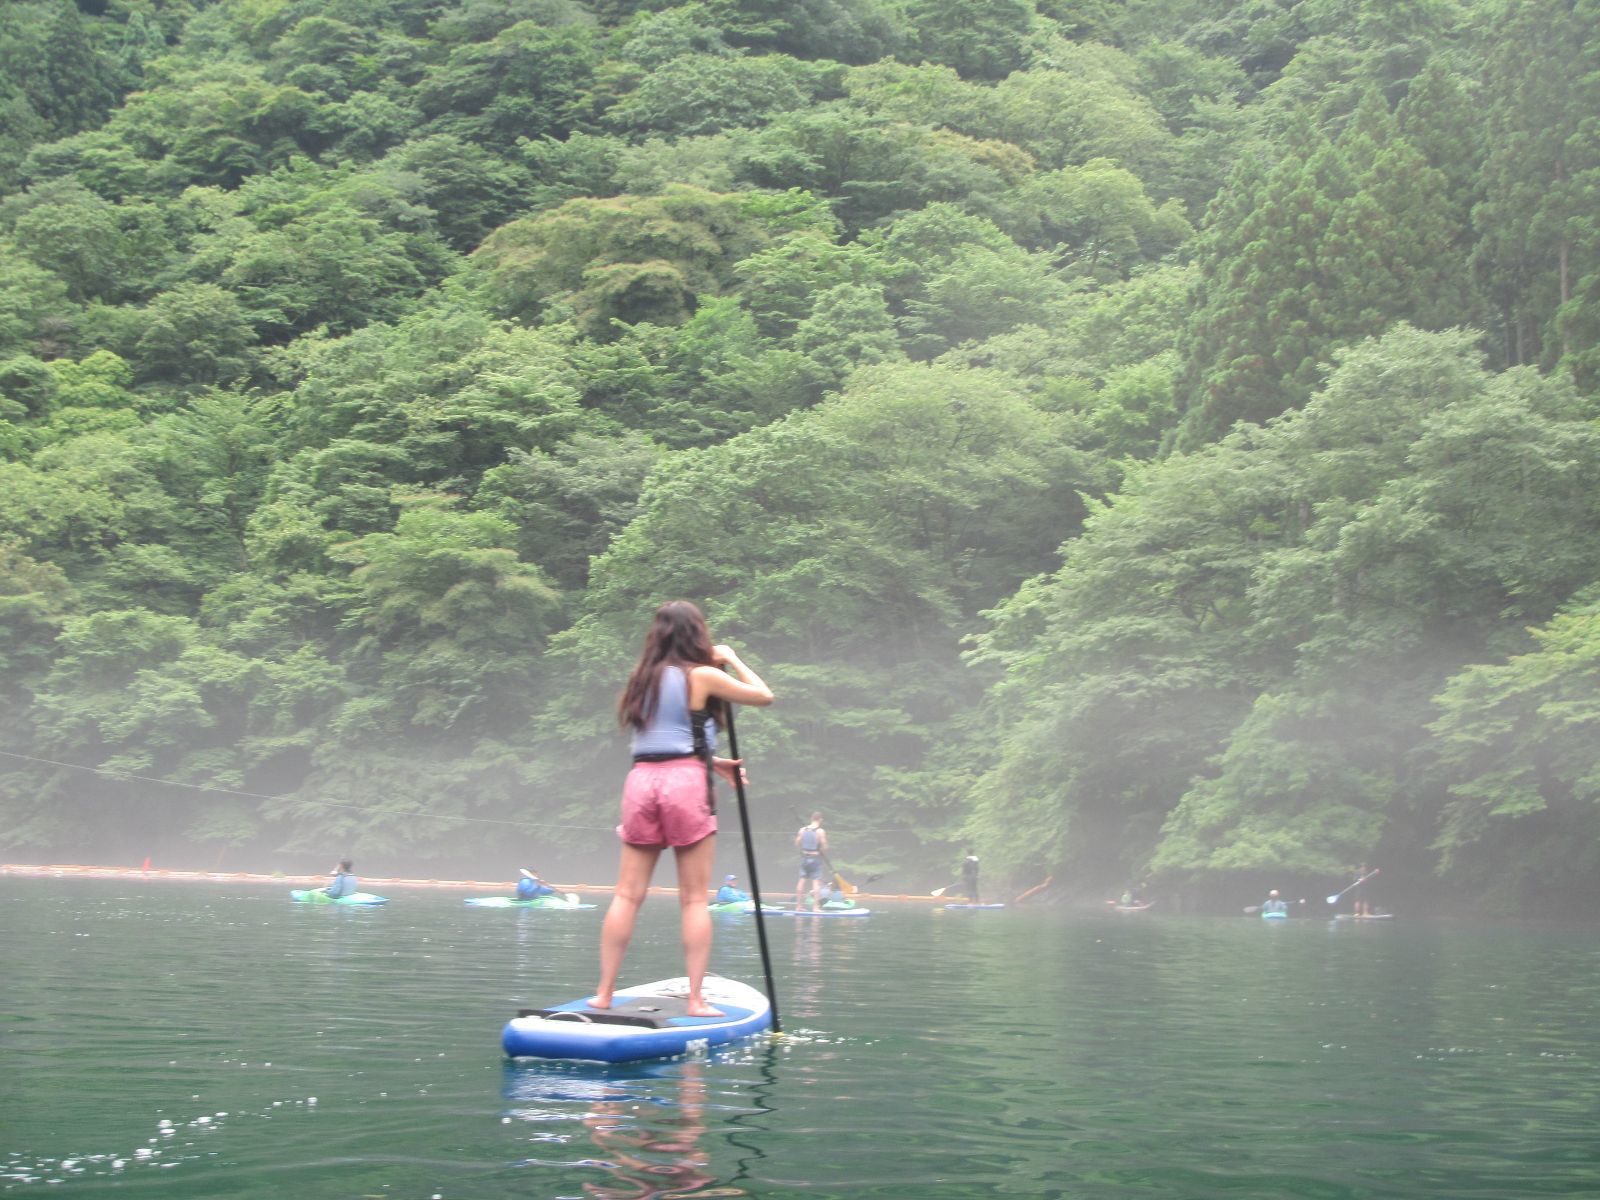 Stand-Up Paddle Boarding